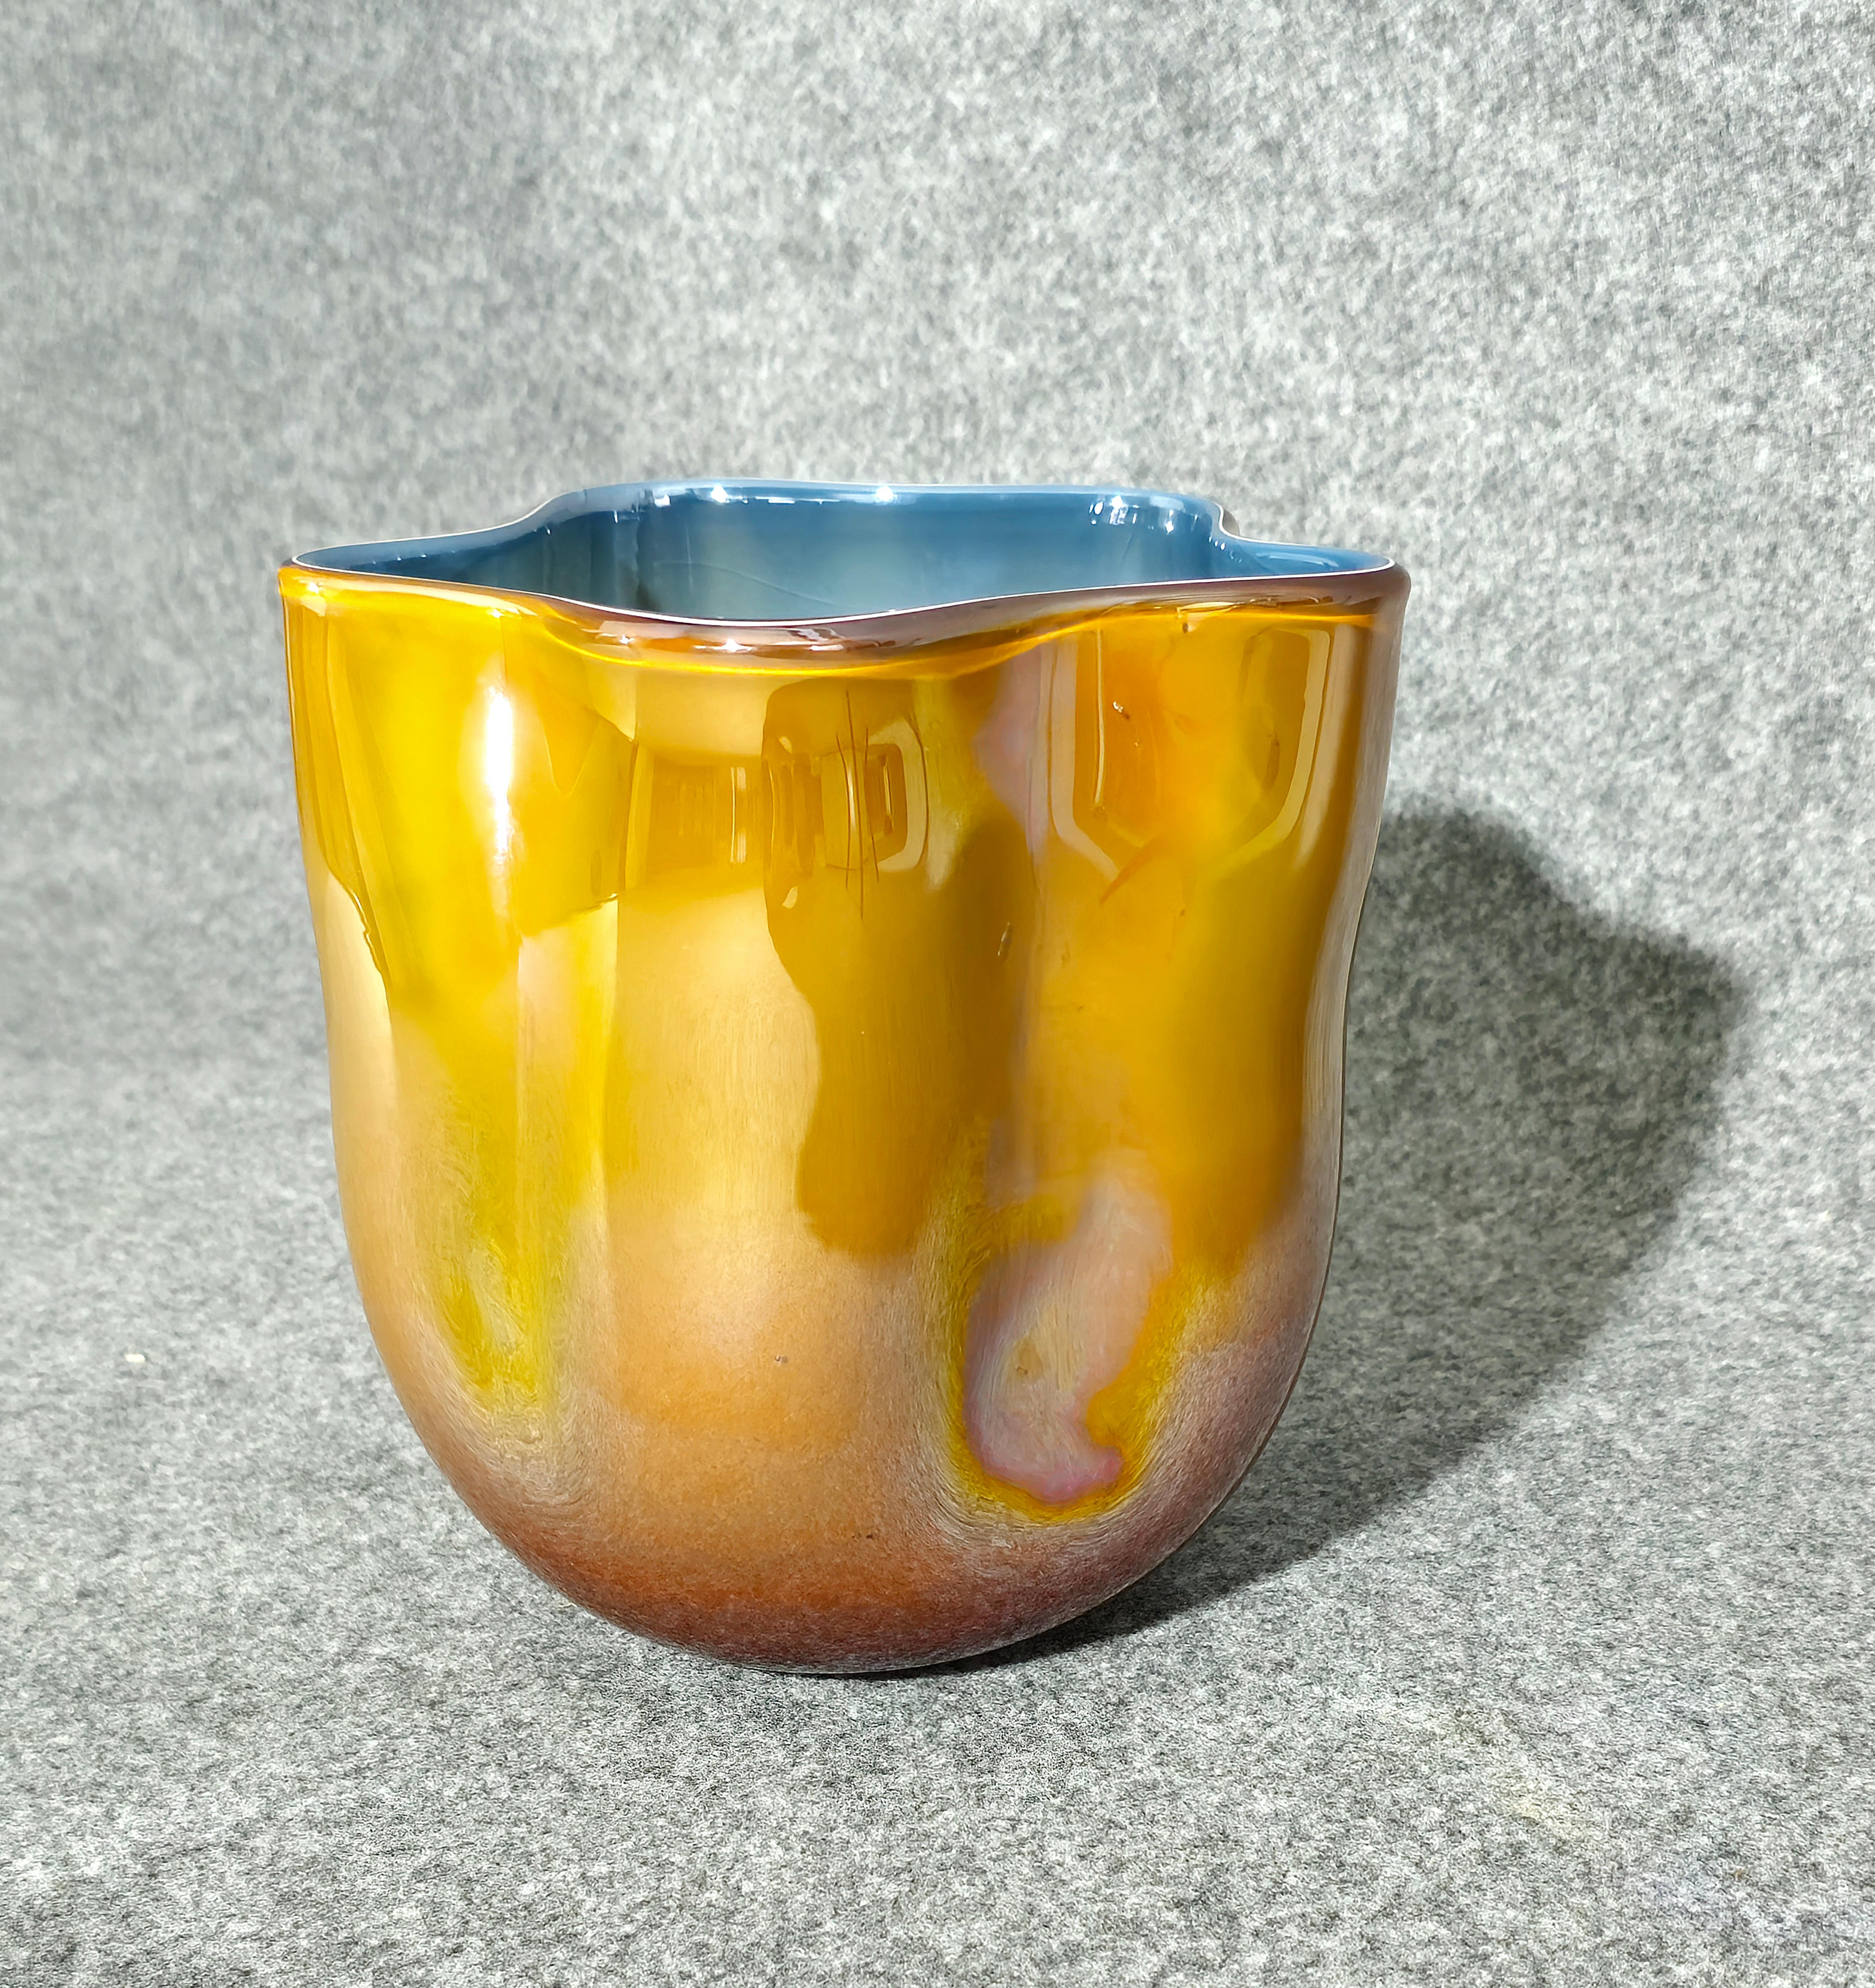 Particular vase in layered Murano glass, amber and blue color with shiny effect. Cylindrical body with wavy walls, flat wavy mouth, produced in Italy in the 70s. Unfortunately some reflections do not give it its actual beauty.

Note: We try to offer